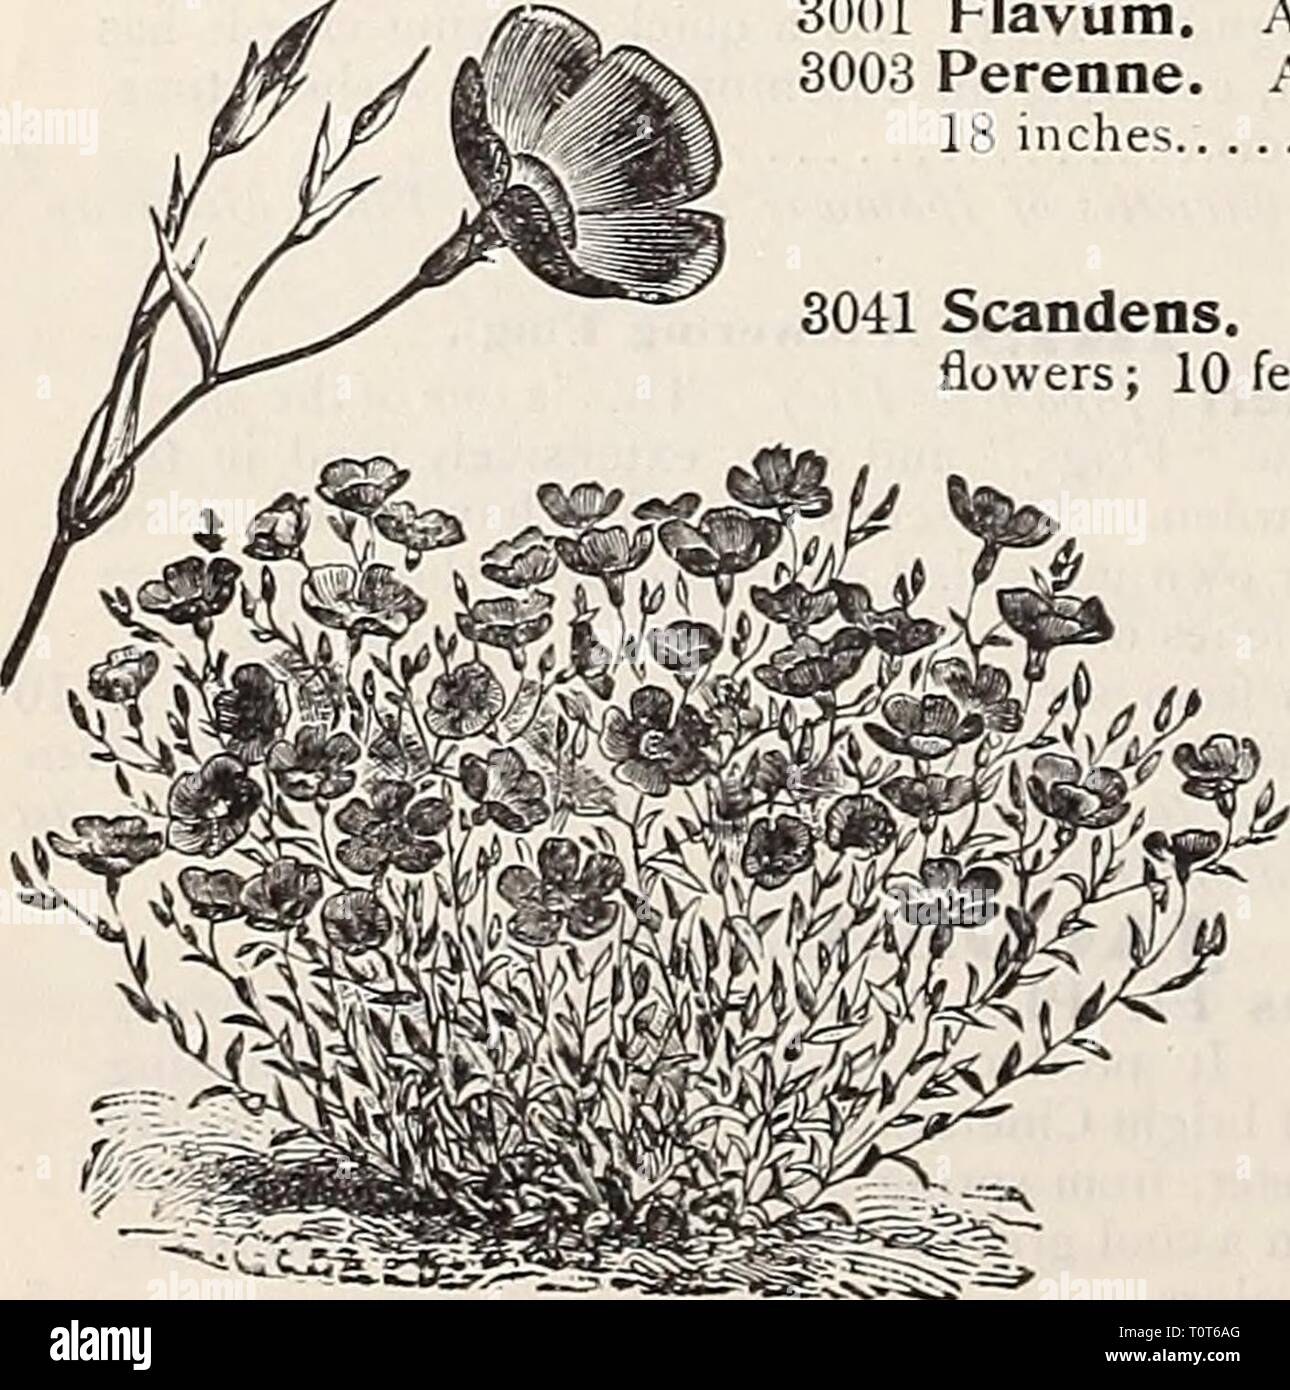 Dreer's 1907 garden book (1907) Dreer's 1907 garden book  dreers1907garden1907henr Year: 1907  Lavateka Trimestkis Grandiflora Rosea. LATHYRUS. (Everlasting, or Hardy Sweet Pea.) free-flowering hardy perennial climbers for covering old stumps, fences, etc., continually in bloom ; fine for cutting. PEr pkt. 2956 Latifolius. Purplish-red 5 2957 â Albus. Pure white, very desir- able 10 2955 â Pink Beauty. Bright rosy pink. 10 2960 â Mixed. Ail colors. Peroz,40 cts 5 3001 Flavum. 3003 Perenne. 18 inches.    EINARIA. 2991 Cymbalaria [Kenilworth Ivy, or Mother of Thousands). Lavender and purple. A c Stock Photo